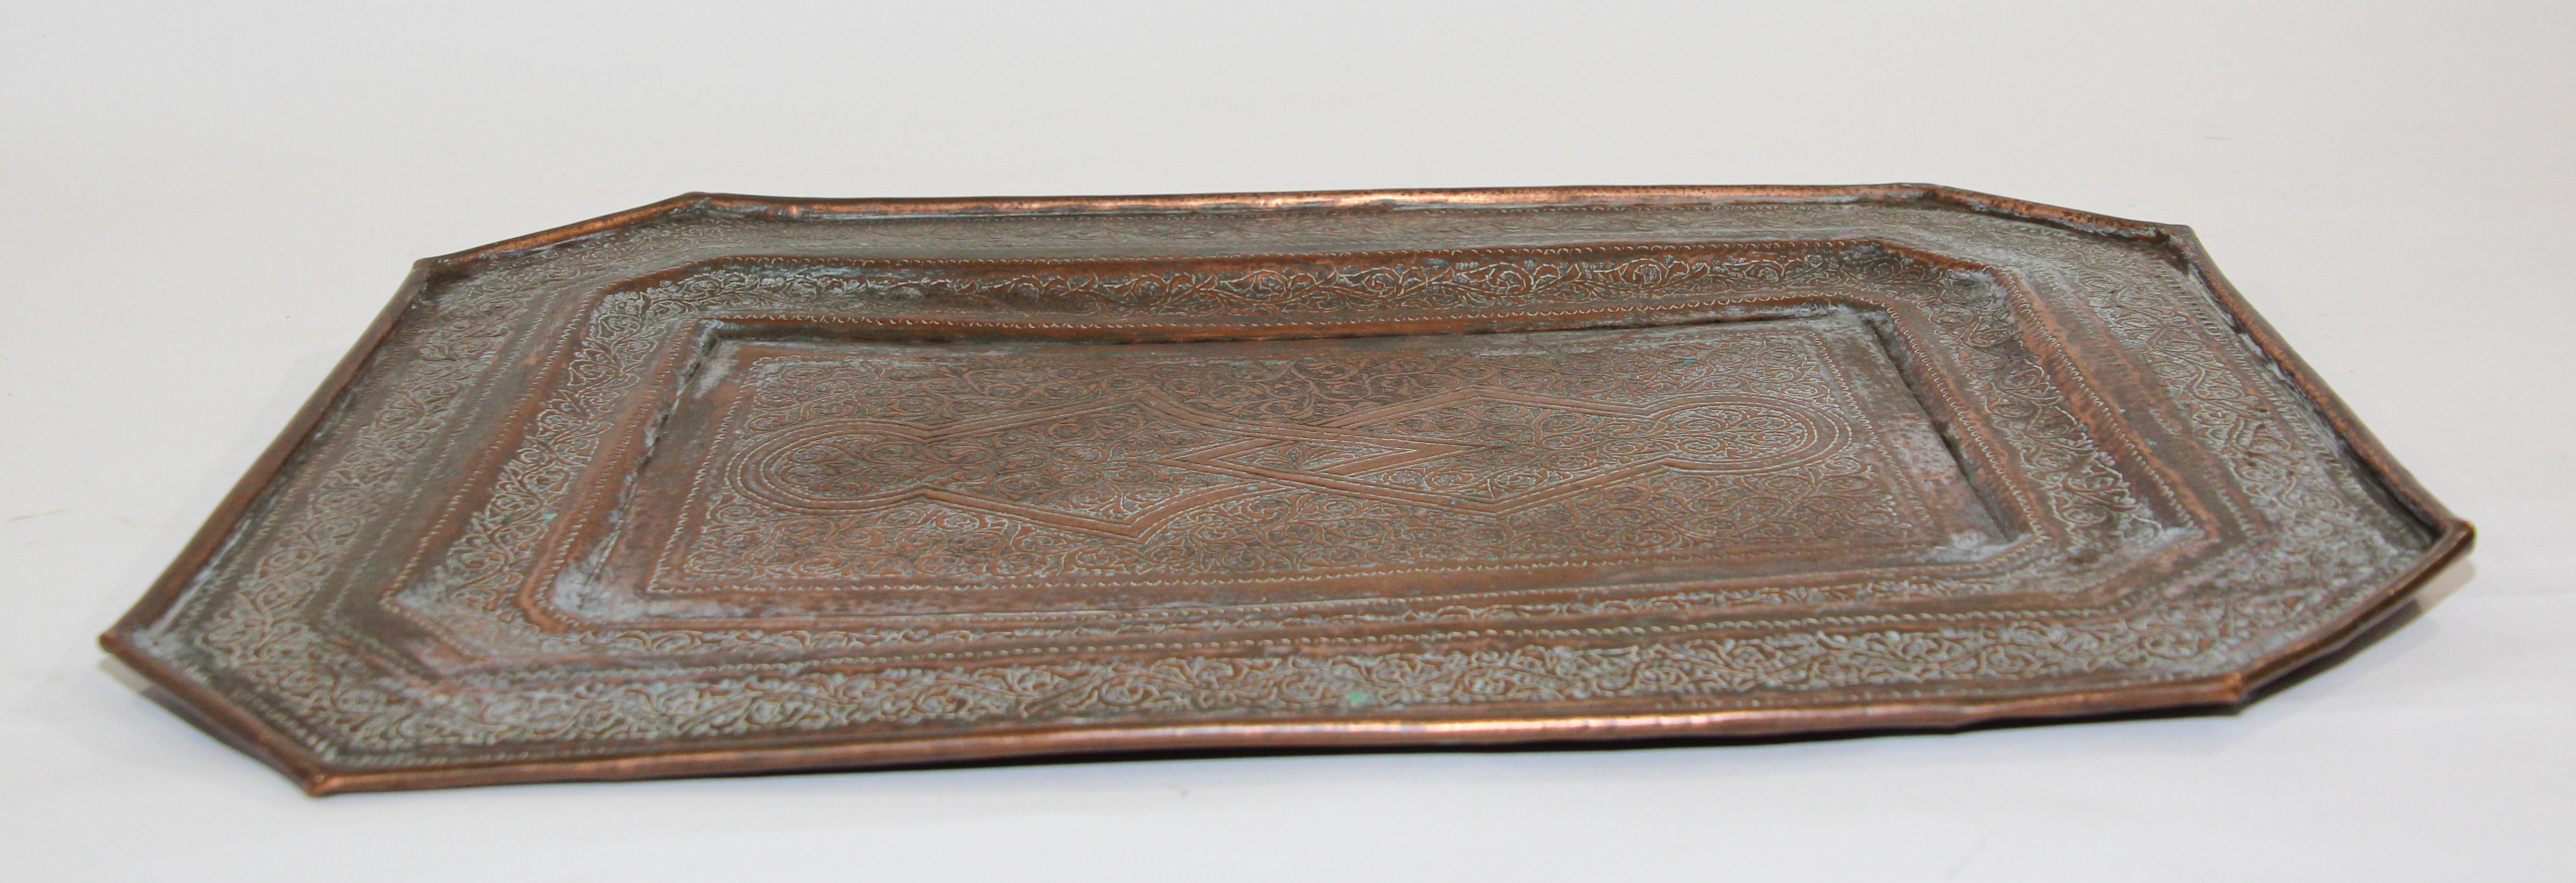 Middle Eastern Octagonal Persian Copper Tray Charger For Sale 2